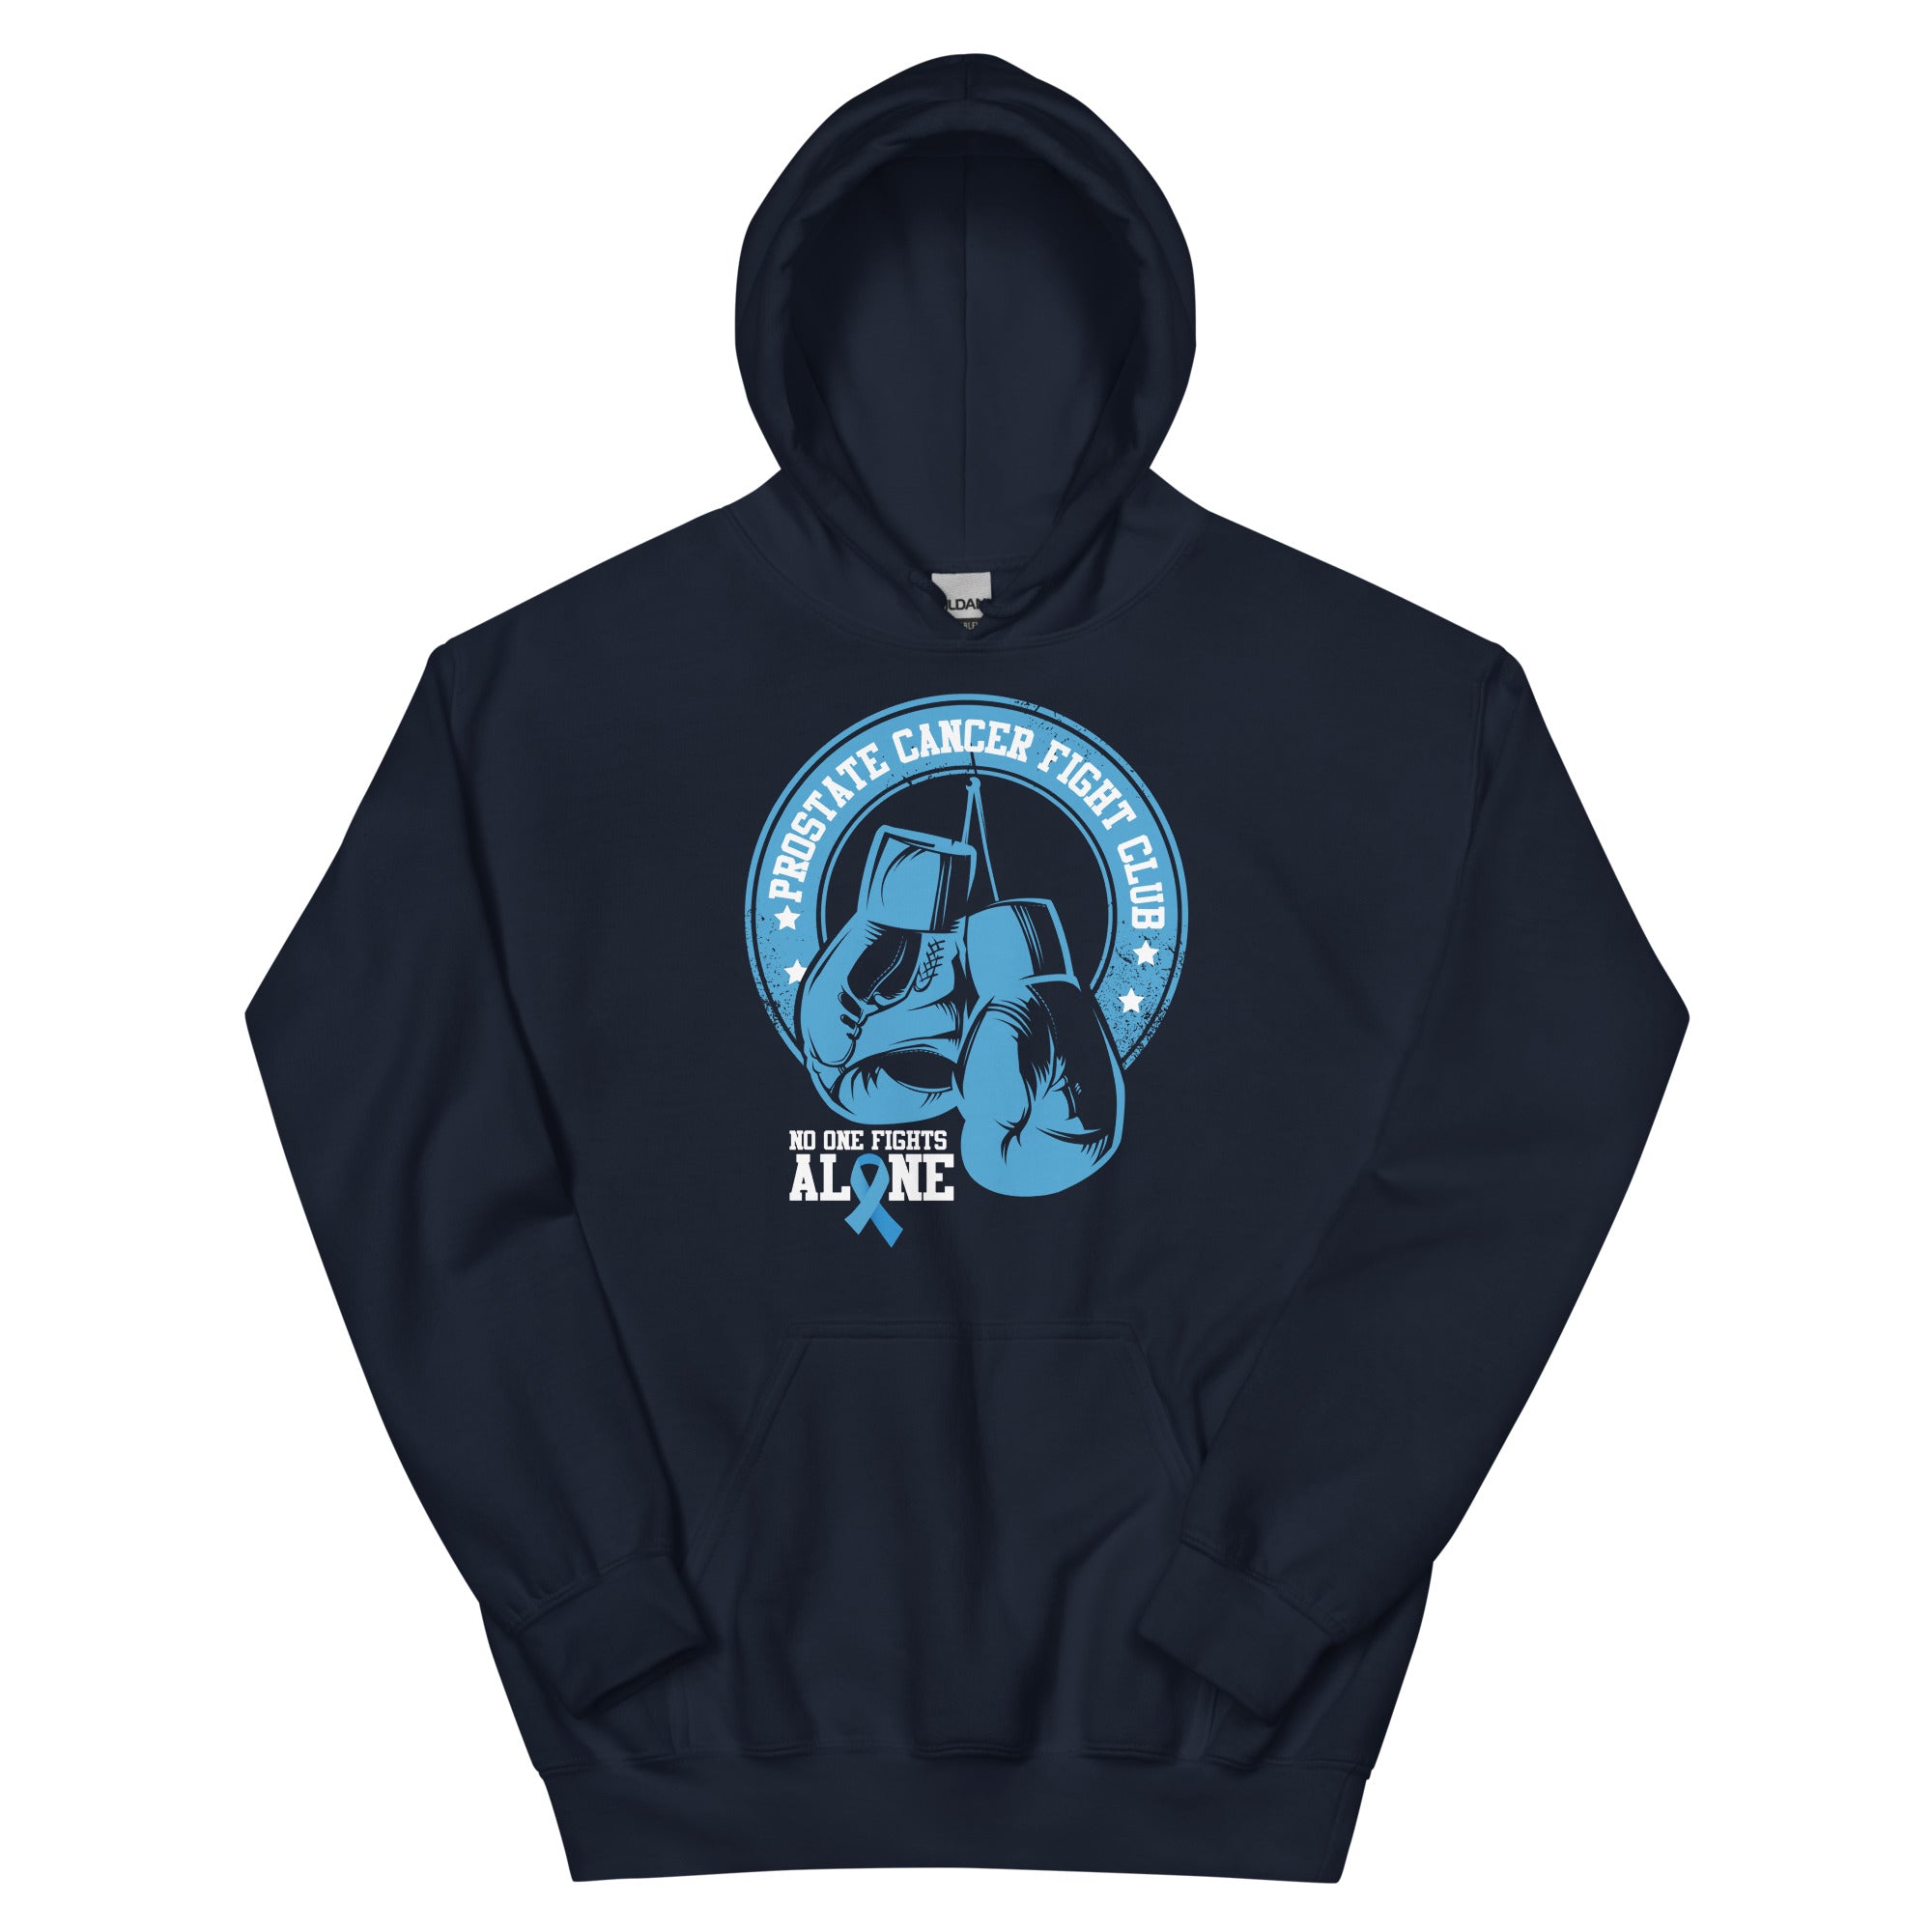 Prostate Cancer Fight Club Hoodie